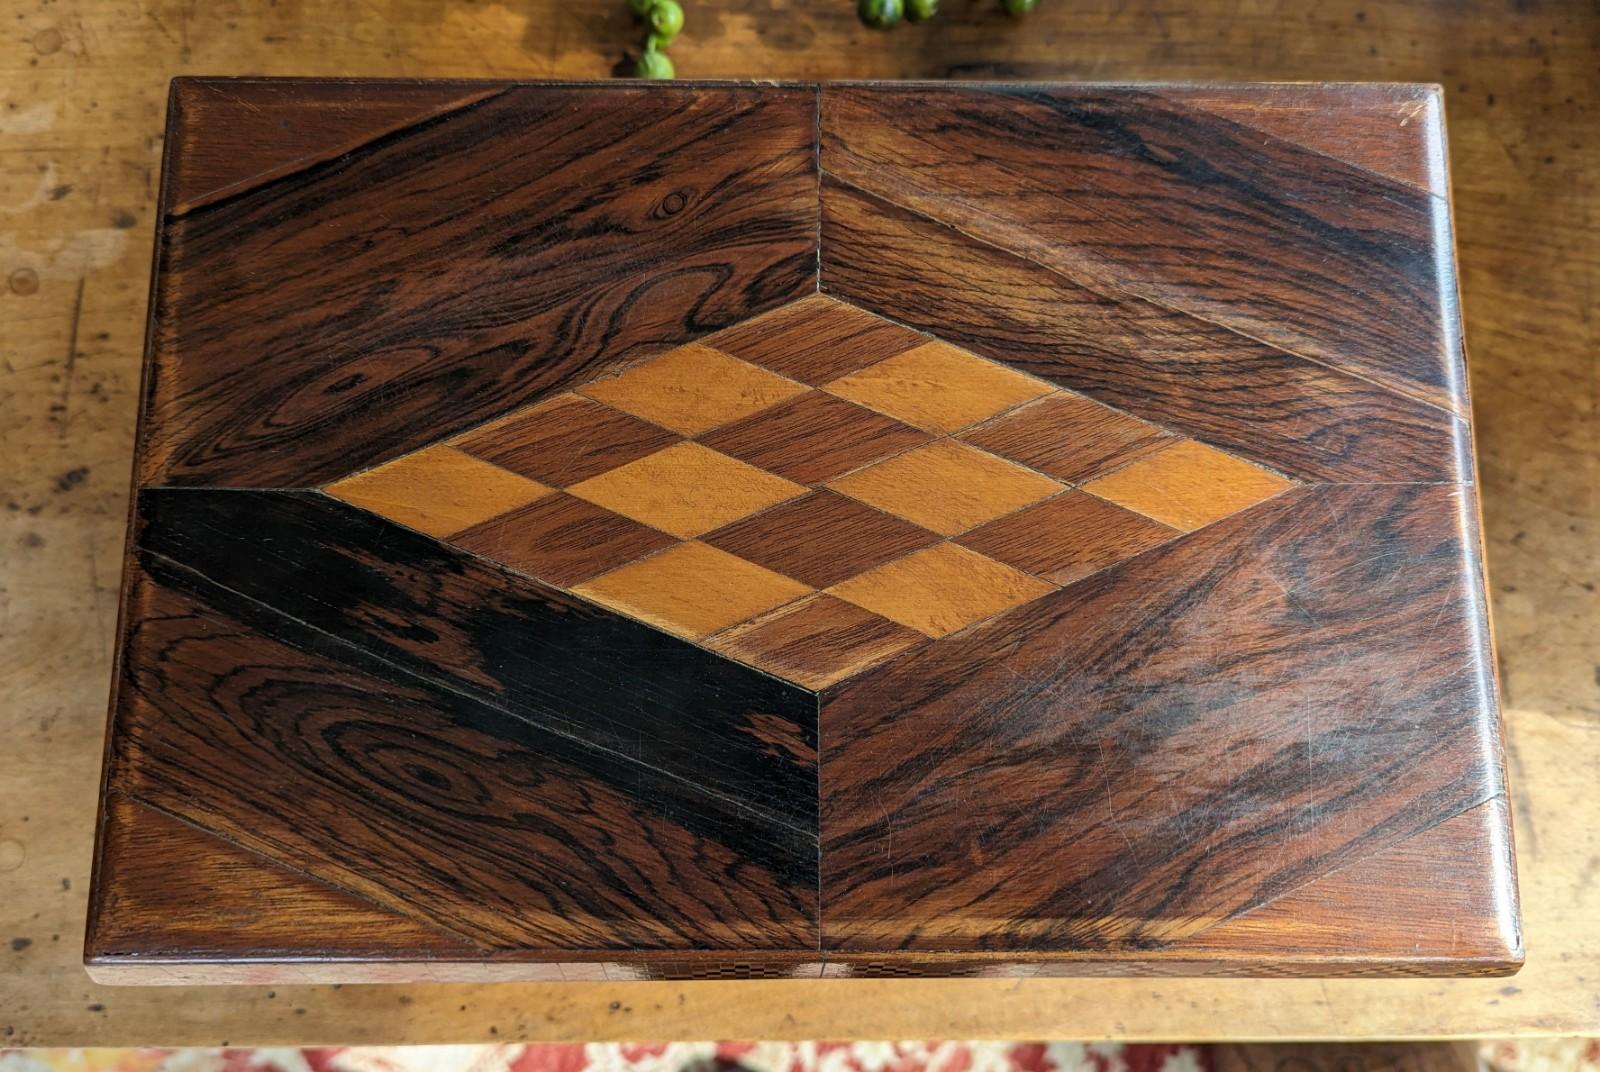 Unknown Antique Large Wood Marquetry Inlay Box with Decorative Checkered Design For Sale